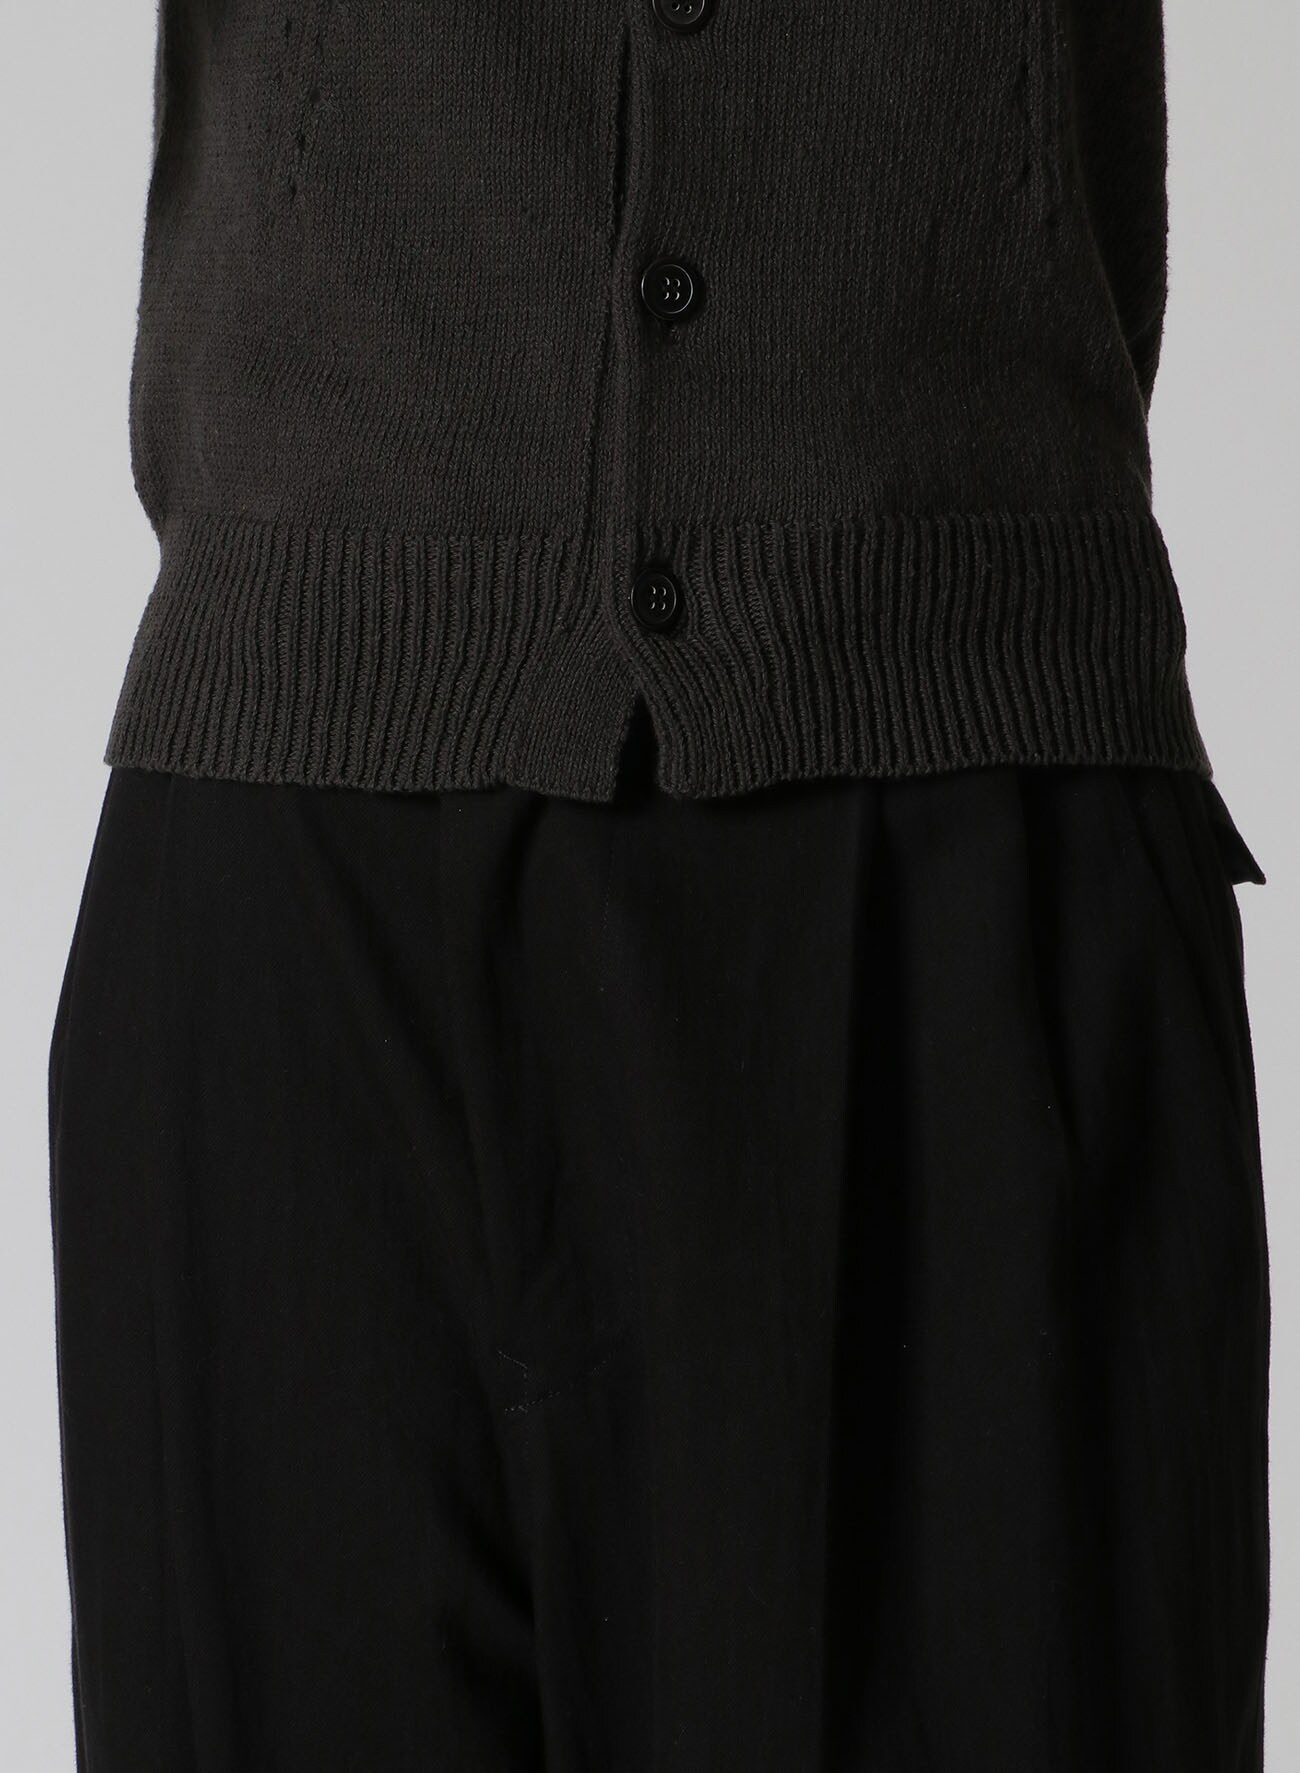 PLAIN STITCH CARDIGAN WITH HOLE DETAILS AND ASYMMETRIC COLLAR/SLEEVES